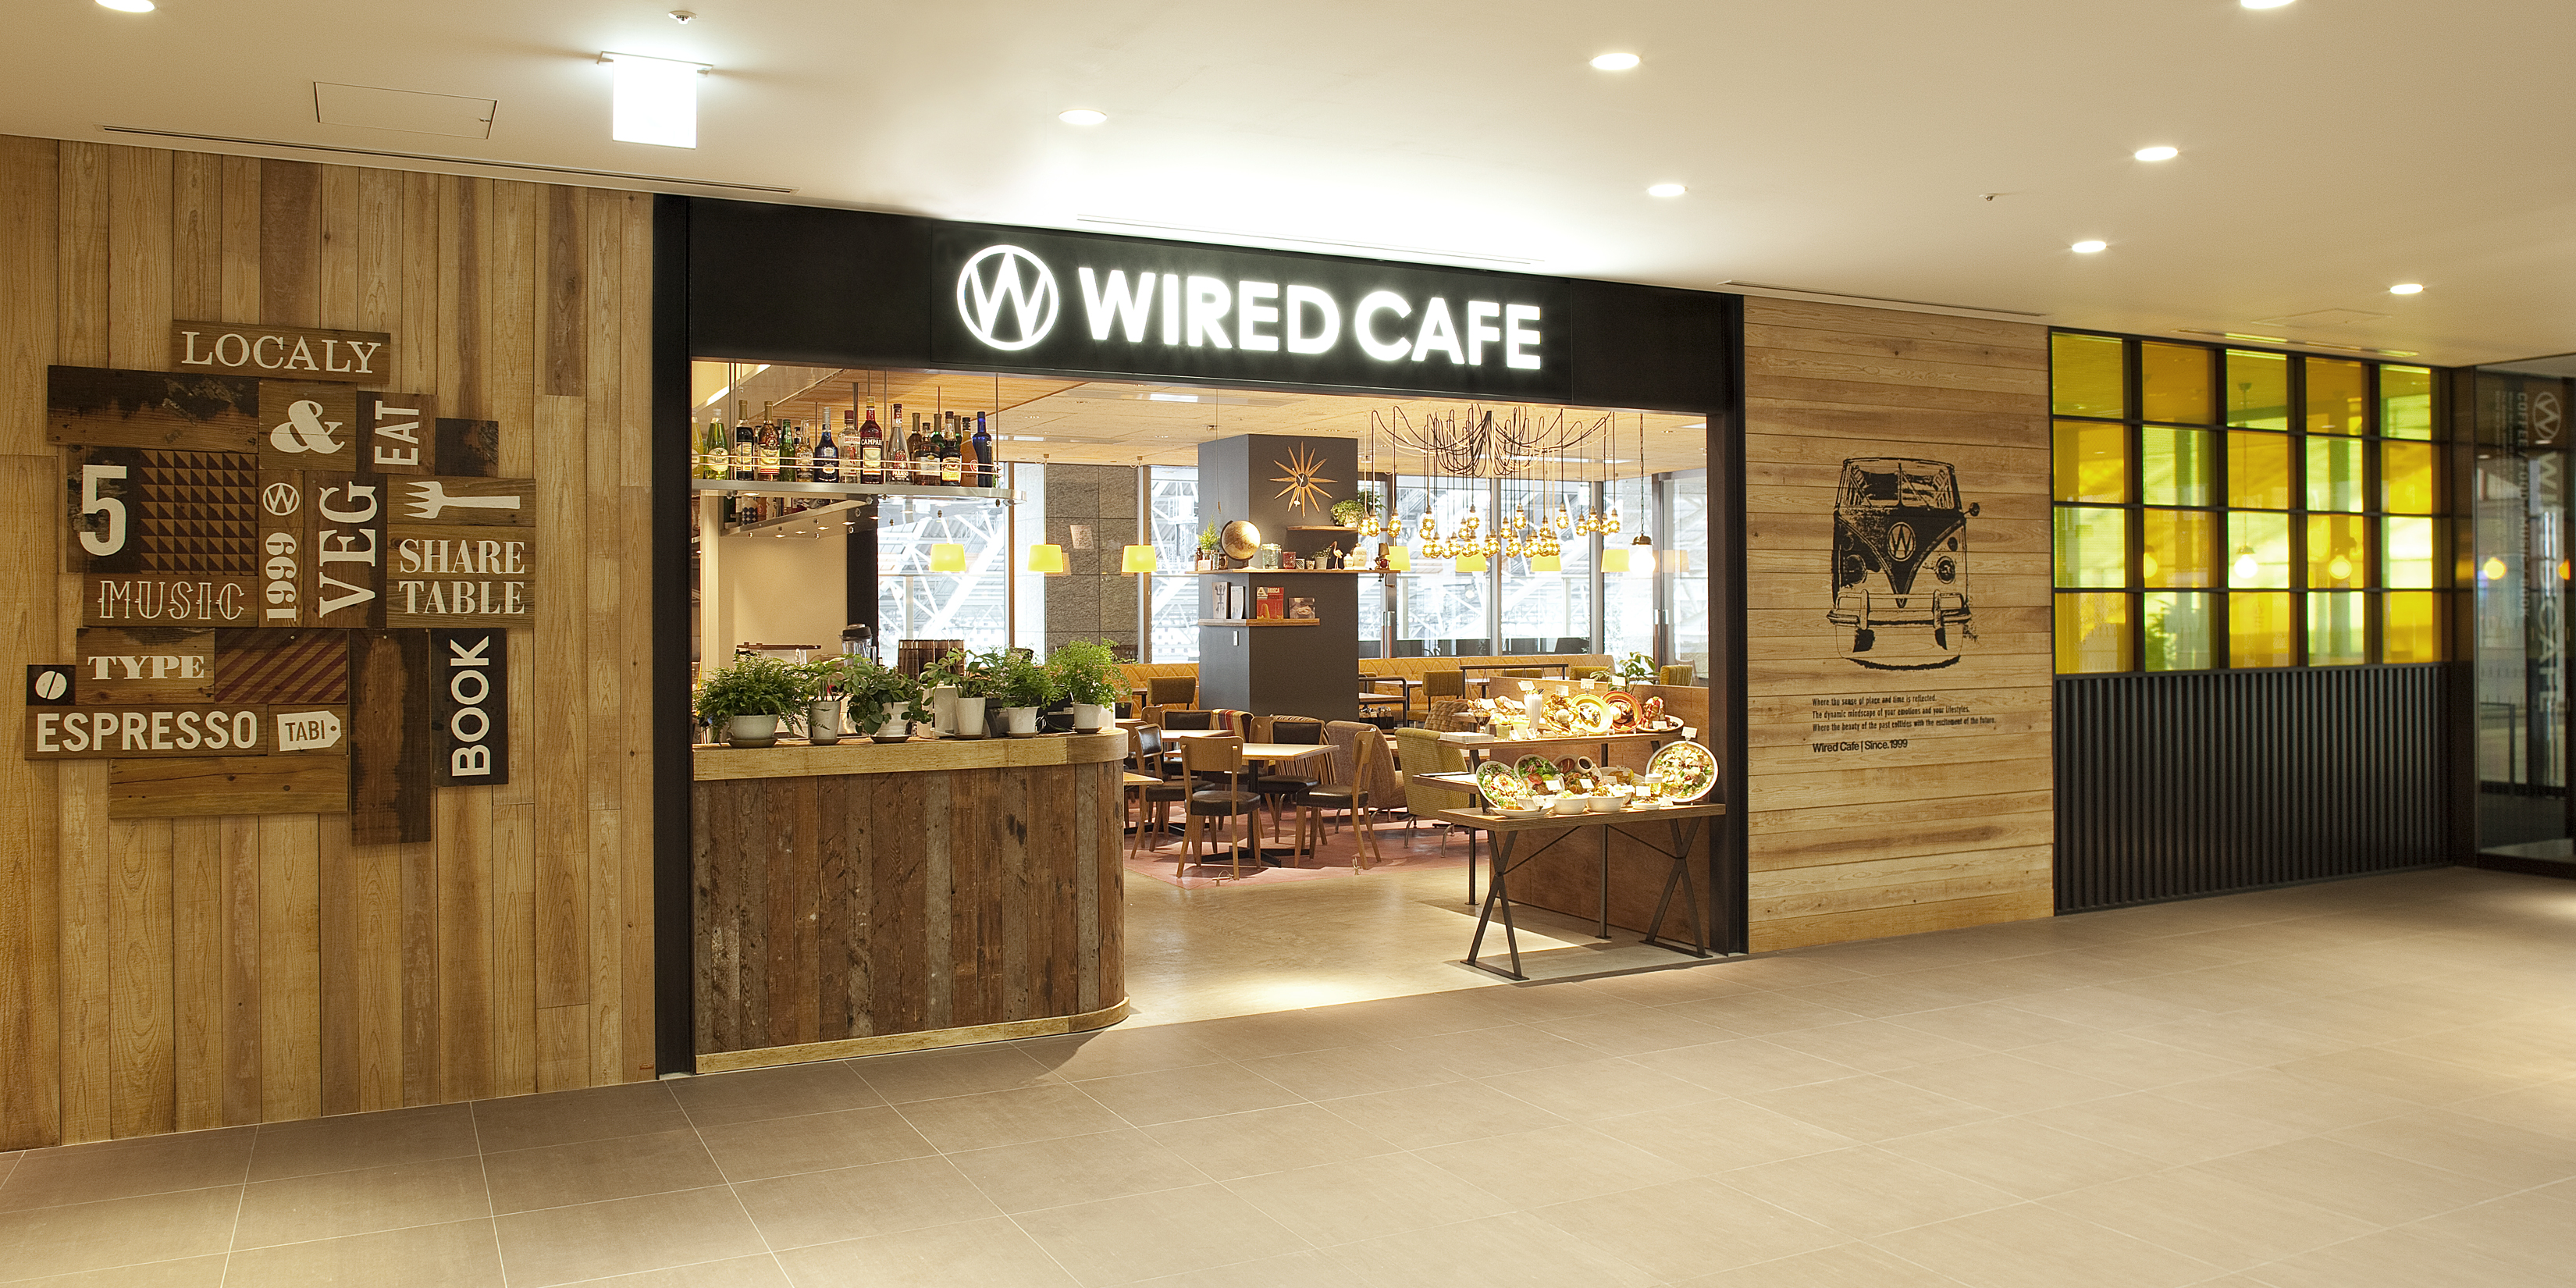 Wired Cafe Cafe Company